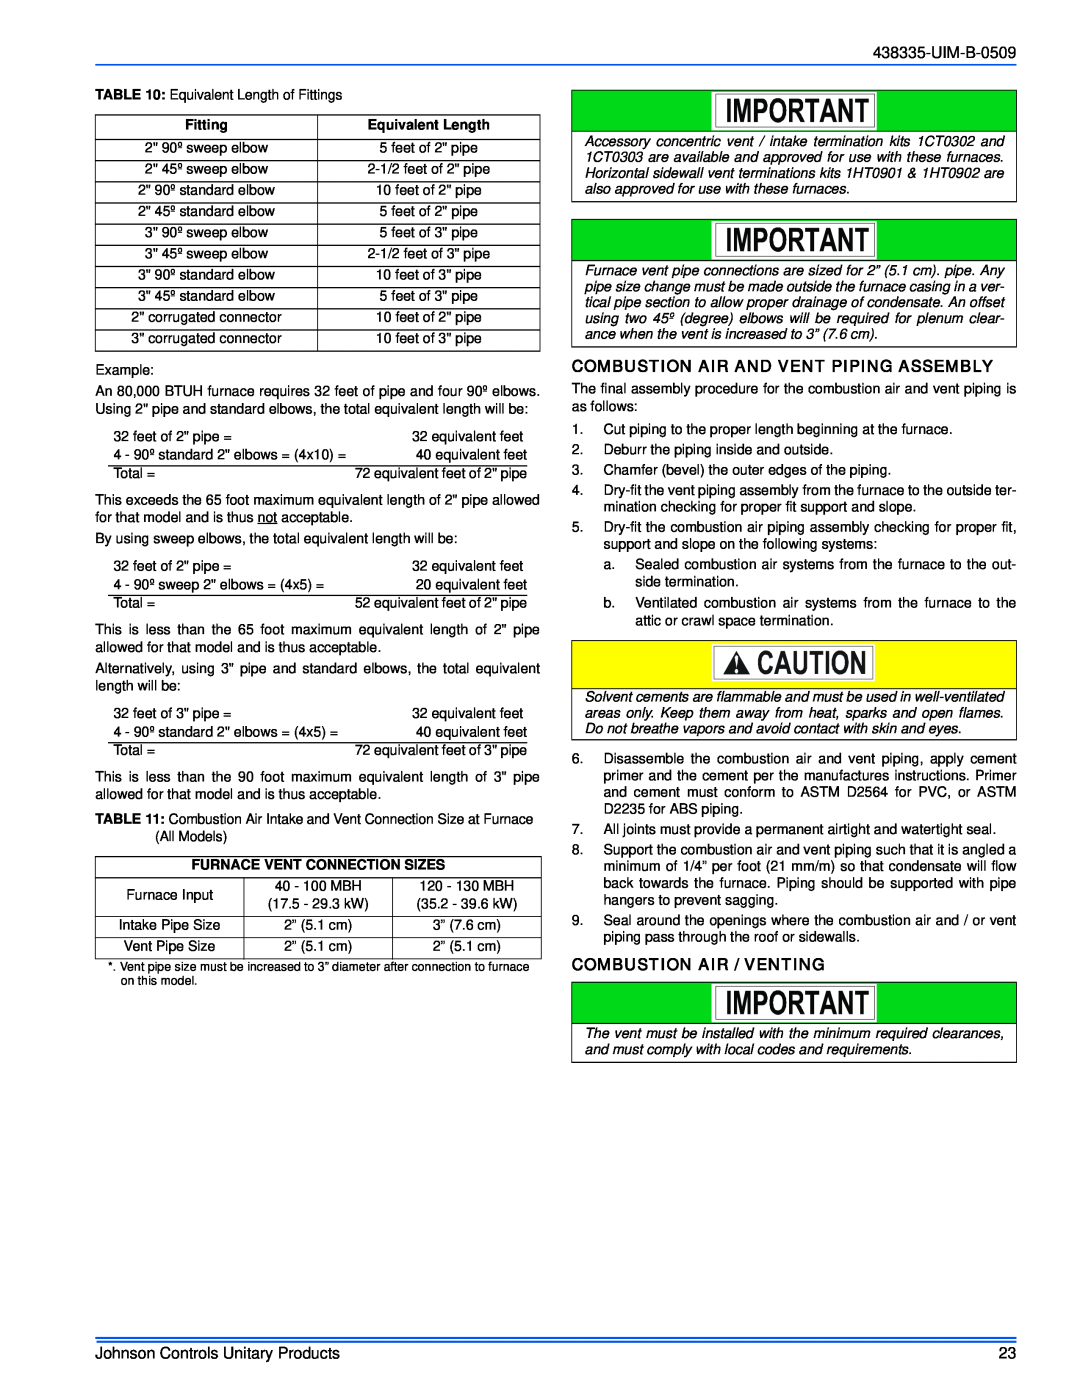 Johnson Controls TM9V MP installation manual UIM-B-0509, Combustion Air And Vent Piping Assembly, Combustion Air / Venting 